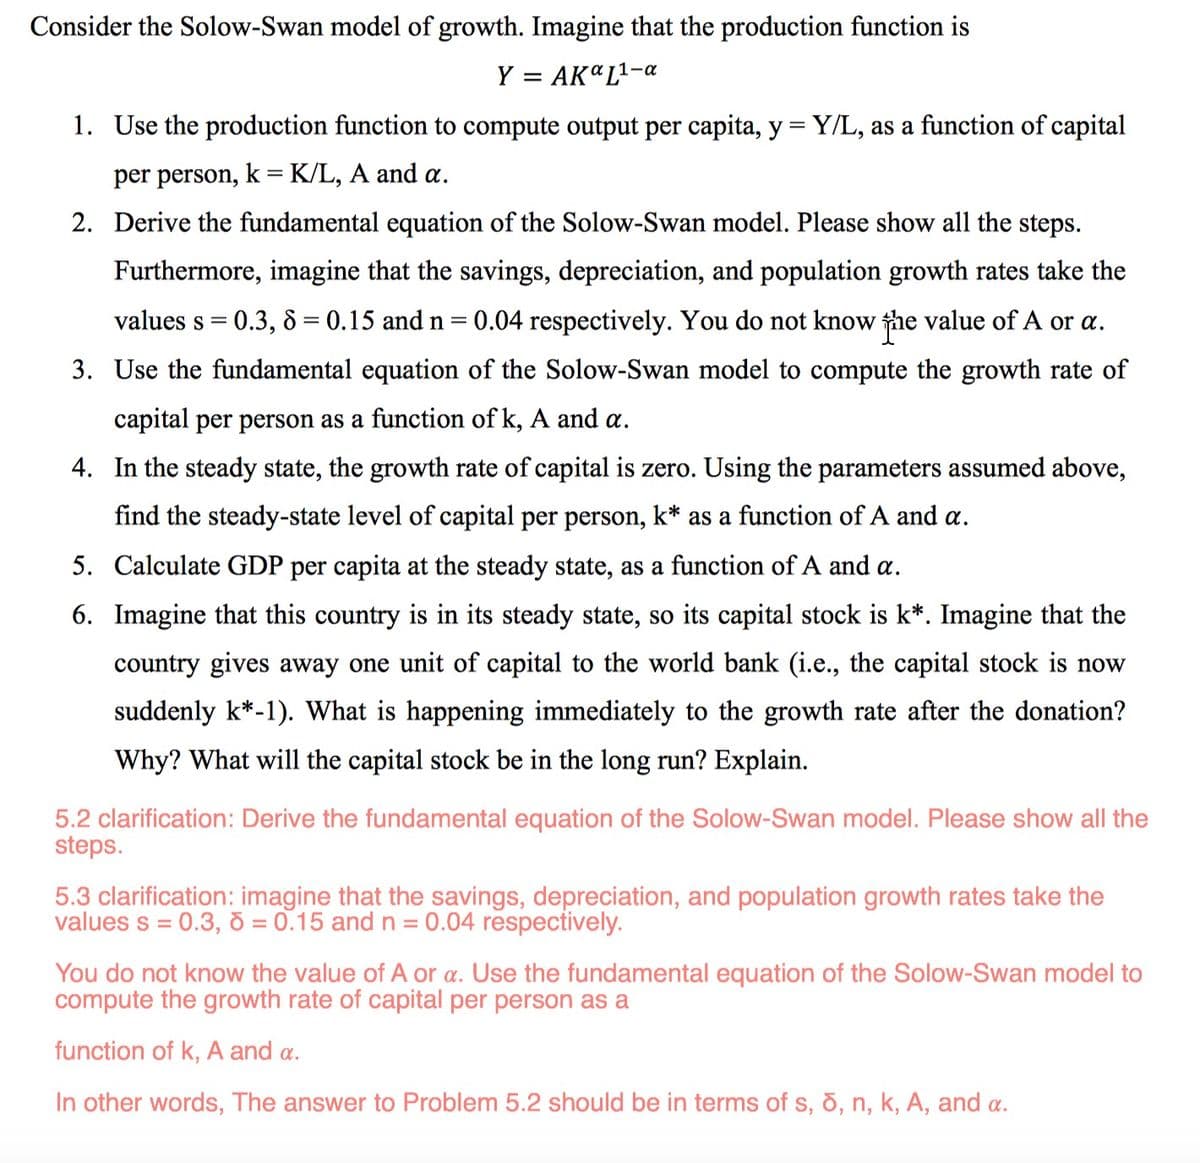 Consider the Solow-Swan model of growth. Imagine that the production function is
Y
= AKa L¹-a
1. Use the production function to compute output per capita, y = Y/L, as a function of capital
per person, k = K/L, A and a.
2. Derive the fundamental equation of the Solow-Swan model. Please show all the steps.
Furthermore, imagine that the savings, depreciation, and population growth rates take the
values s = 0.3, 8 = 0.15 and n = 0.04 respectively. You do not know the value of A or a.
3. Use the fundamental equation of the Solow-Swan model to compute the growth rate of
capital per person as a function of k, A and a.
4. In the steady state, the growth rate of capital is zero. Using the parameters assumed above,
find the steady-state level of capital per person, k* as a function of A and a.
5. Calculate GDP per capita at the steady state, as a function of A and a.
6. Imagine that this country is in its steady state, so its capital stock is k*. Imagine that the
country gives away one unit of capital to the world bank (i.e., the capital stock is now
suddenly k*-1). What is happening immediately to the growth rate after the donation?
Why? What will the capital stock be in the long run? Explain.
5.2 clarification: Derive the fundamental equation of the Solow-Swan model. Please show all the
steps.
5.3 clarification: imagine that the savings, depreciation, and population growth rates take the
values s = 0.3, 6 = 0.15 and n = 0.04 respectively.
You do not know the value of A or a. Use the fundamental equation of the Solow-Swan model to
compute the growth rate of capital per person as a
function of k, A and a.
In other words, The answer to Problem 5.2 should be in terms of s, d, n, k, A, and a.